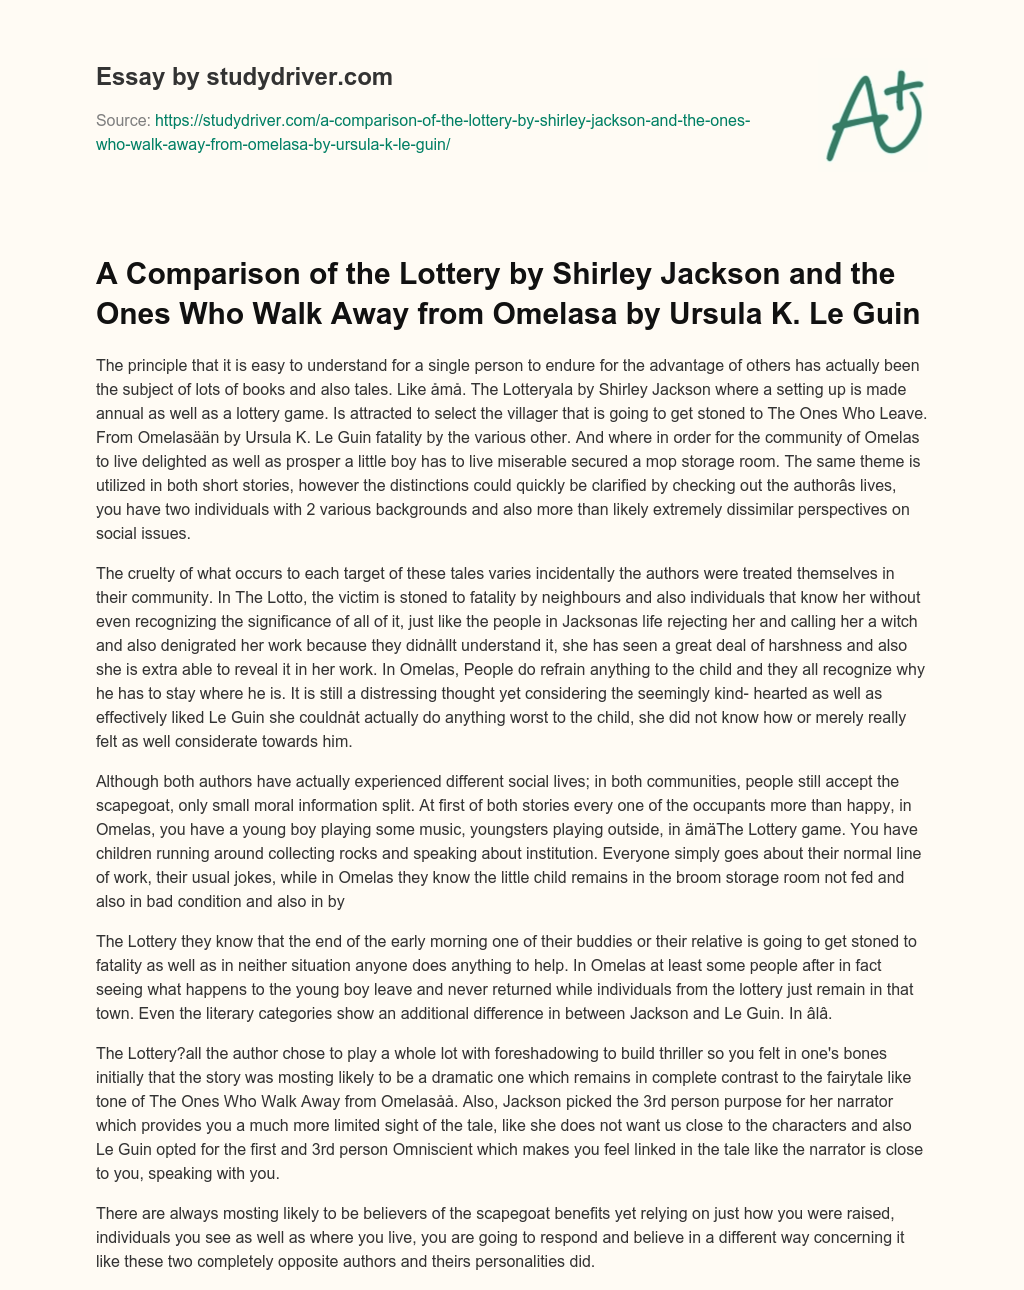 A Comparison of the Lottery by Shirley Jackson and the Ones who Walk Away from Omelasa by Ursula K. Le Guin essay